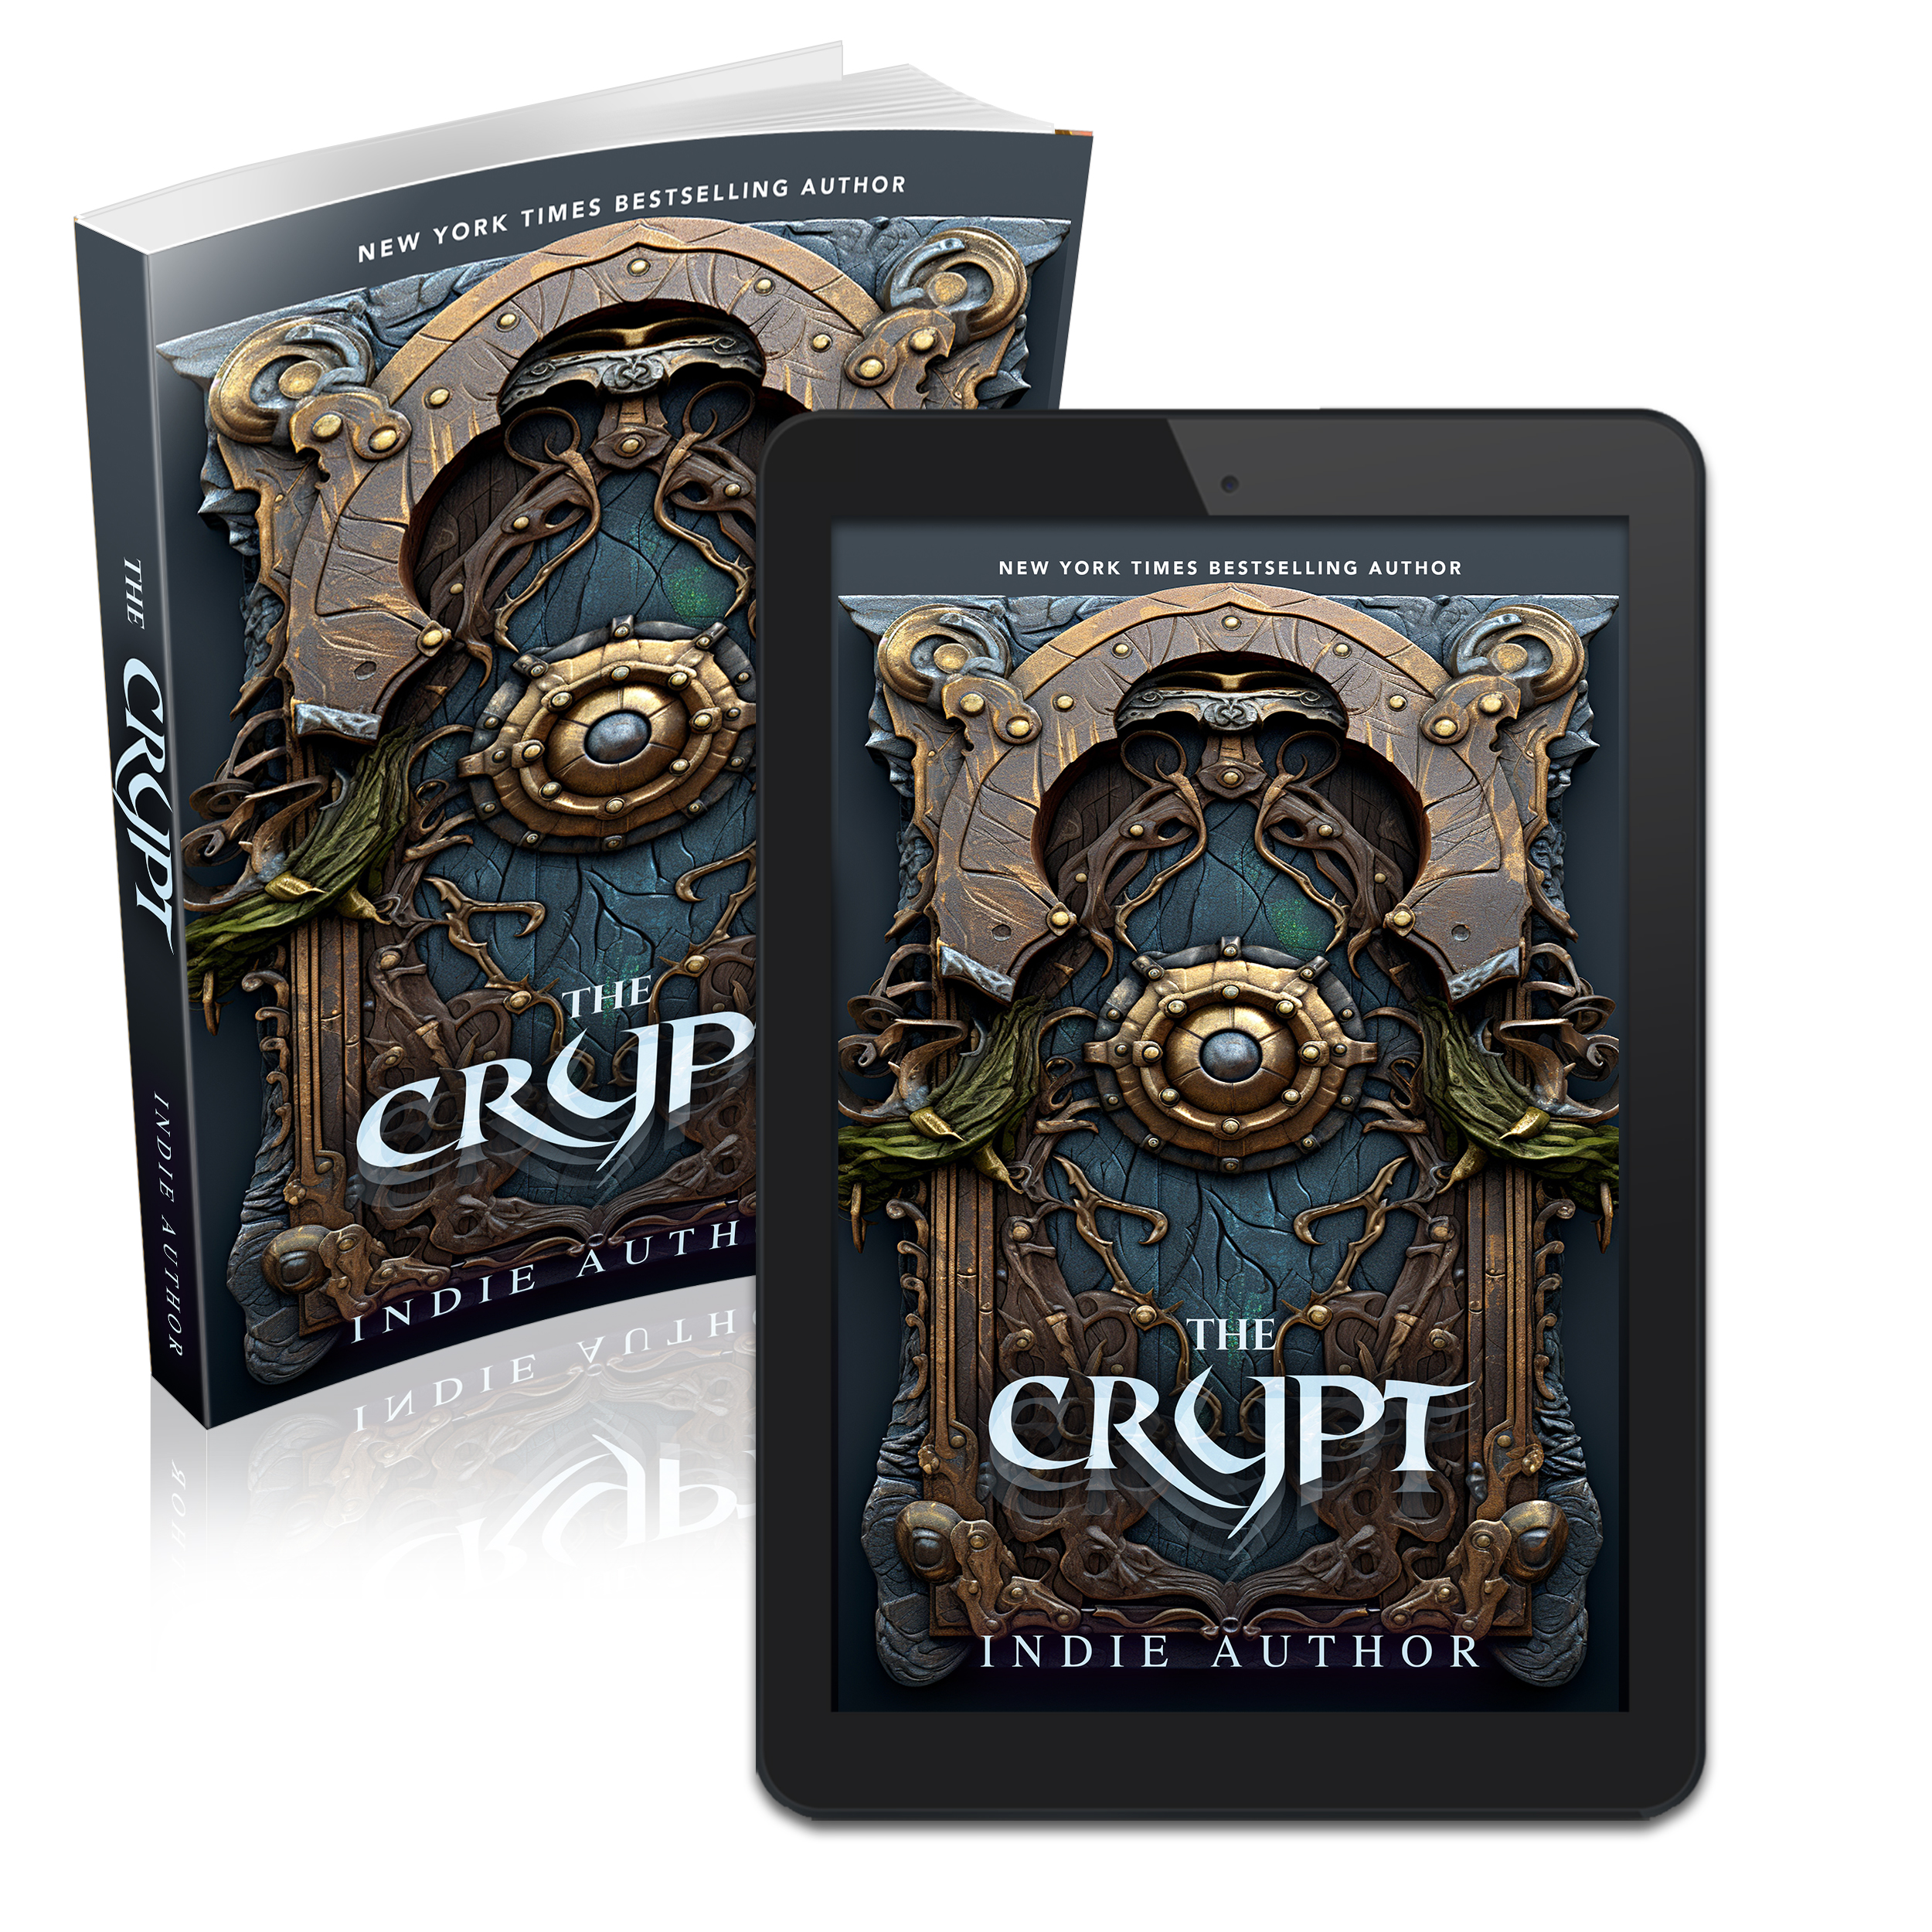 The Crypt premade book cover